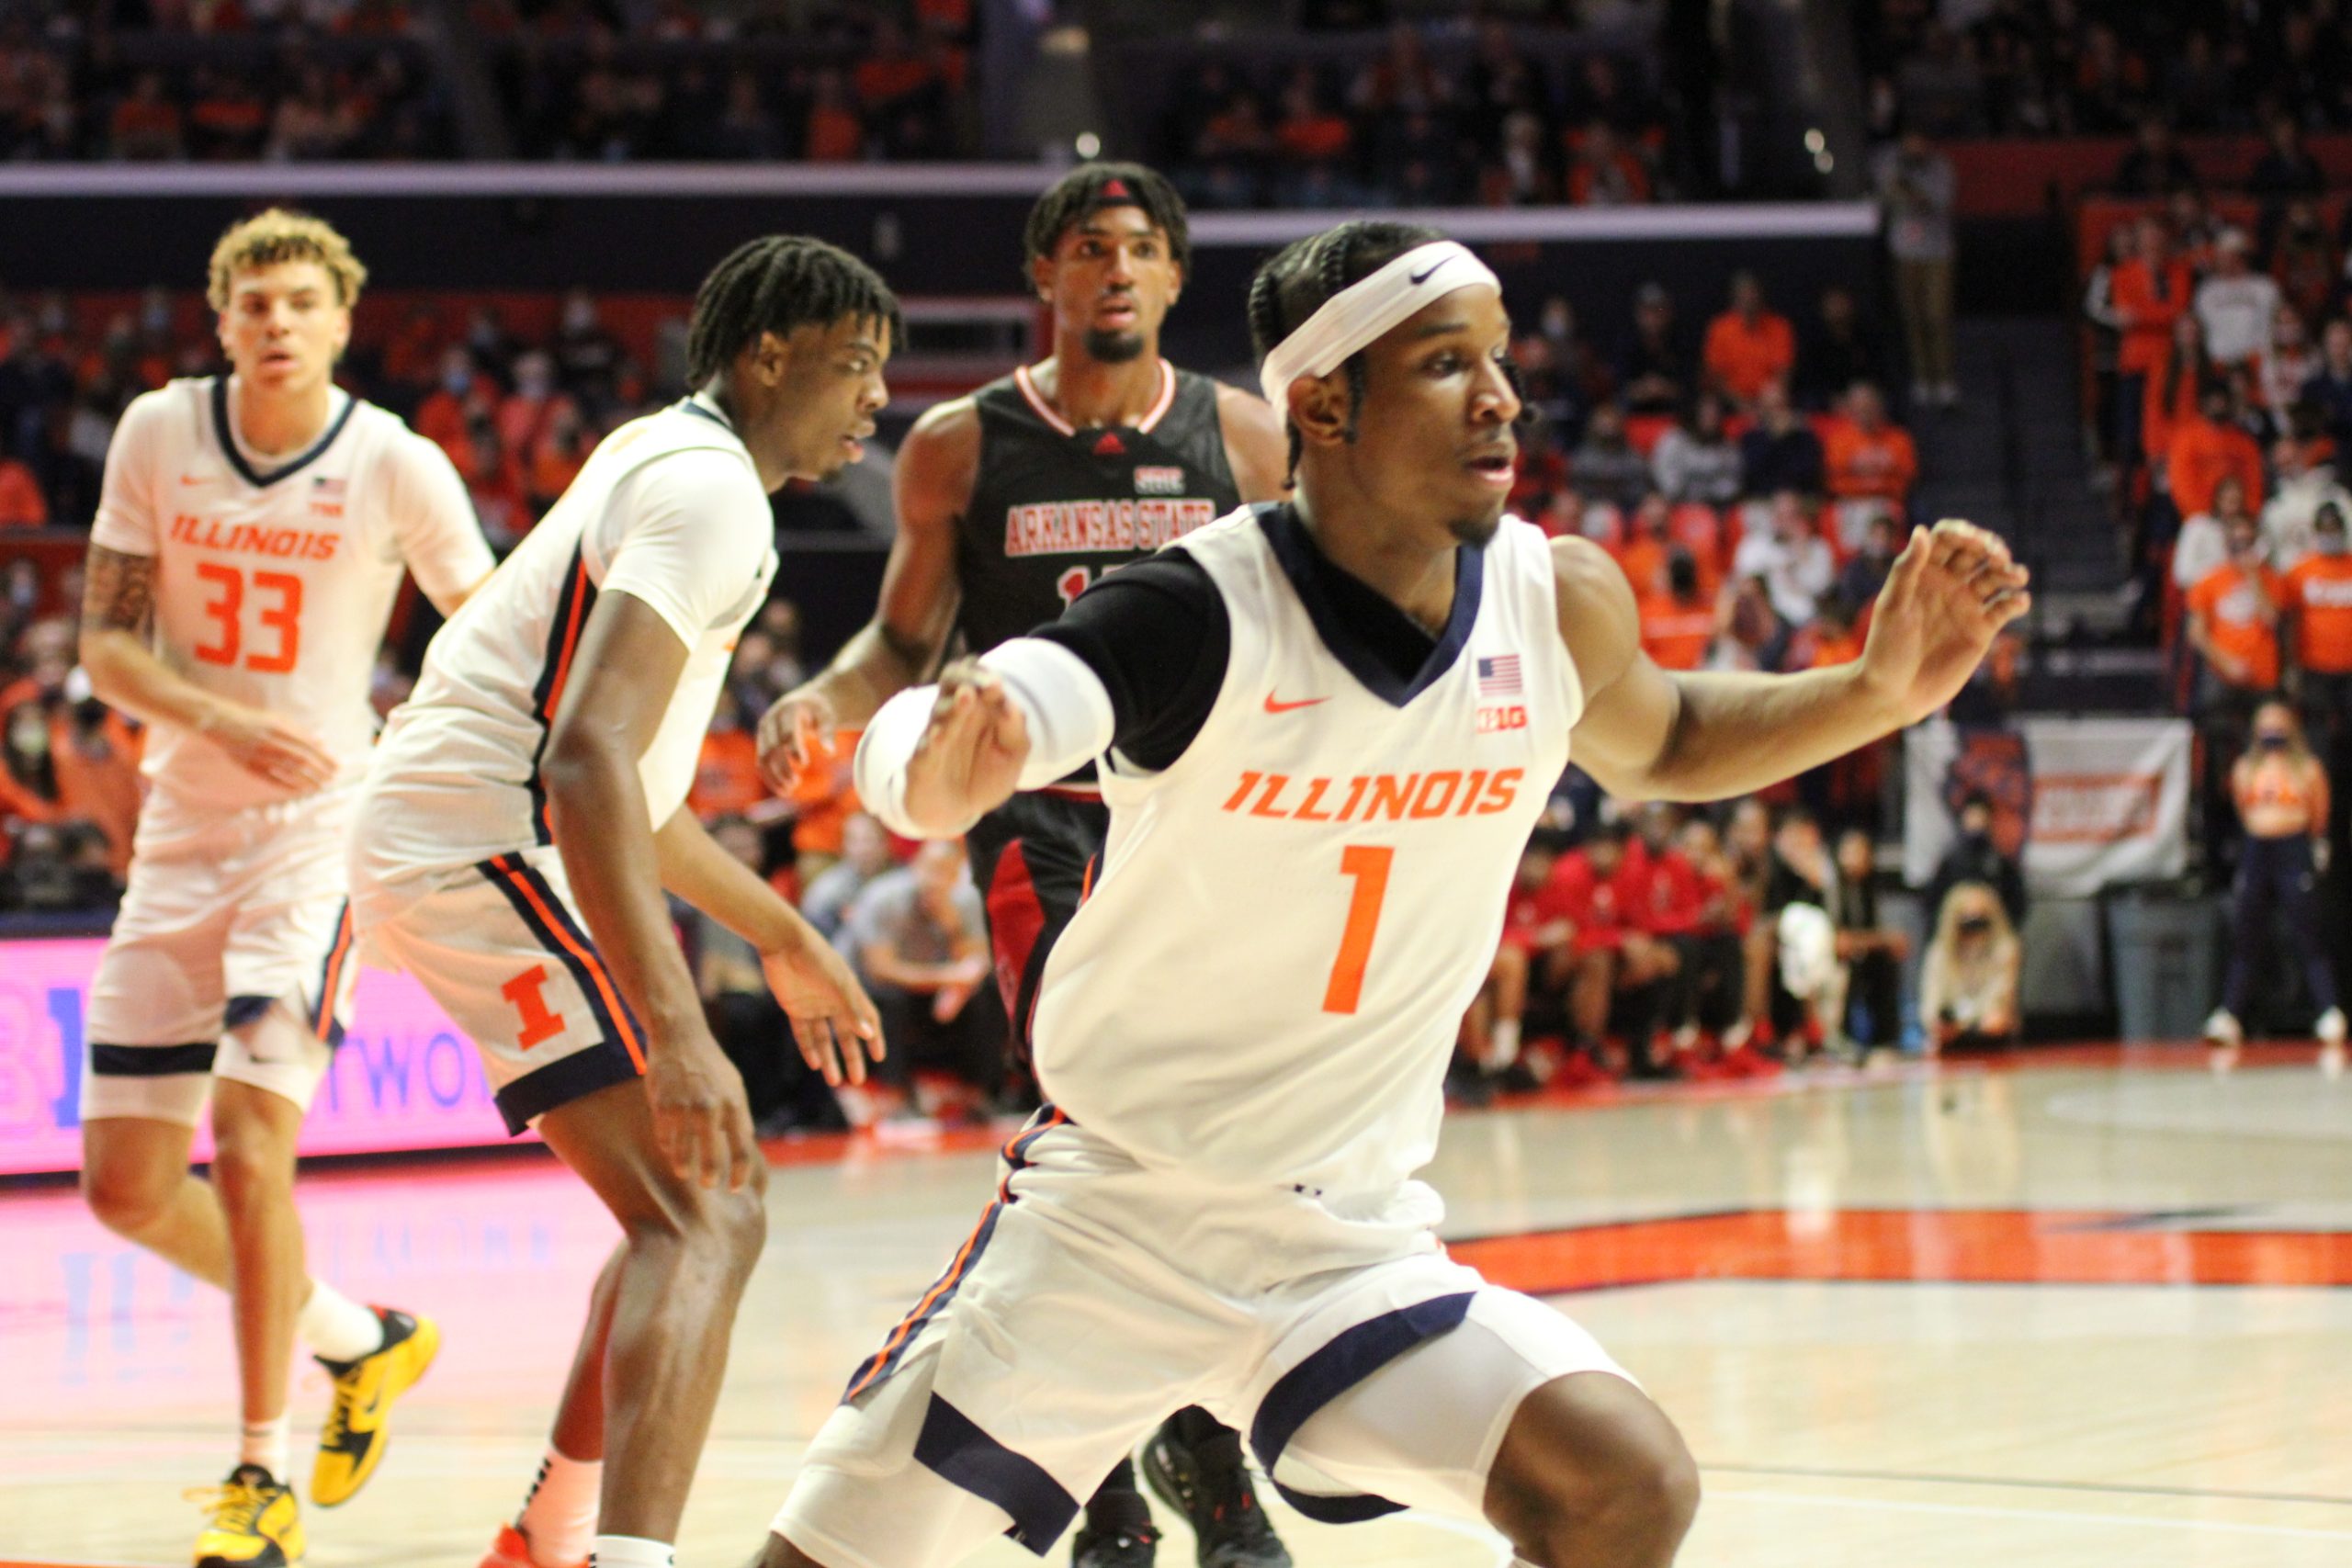 Mike Cagley's Heat Checks and Hail Marys - Does Illinois Have a Third Star?